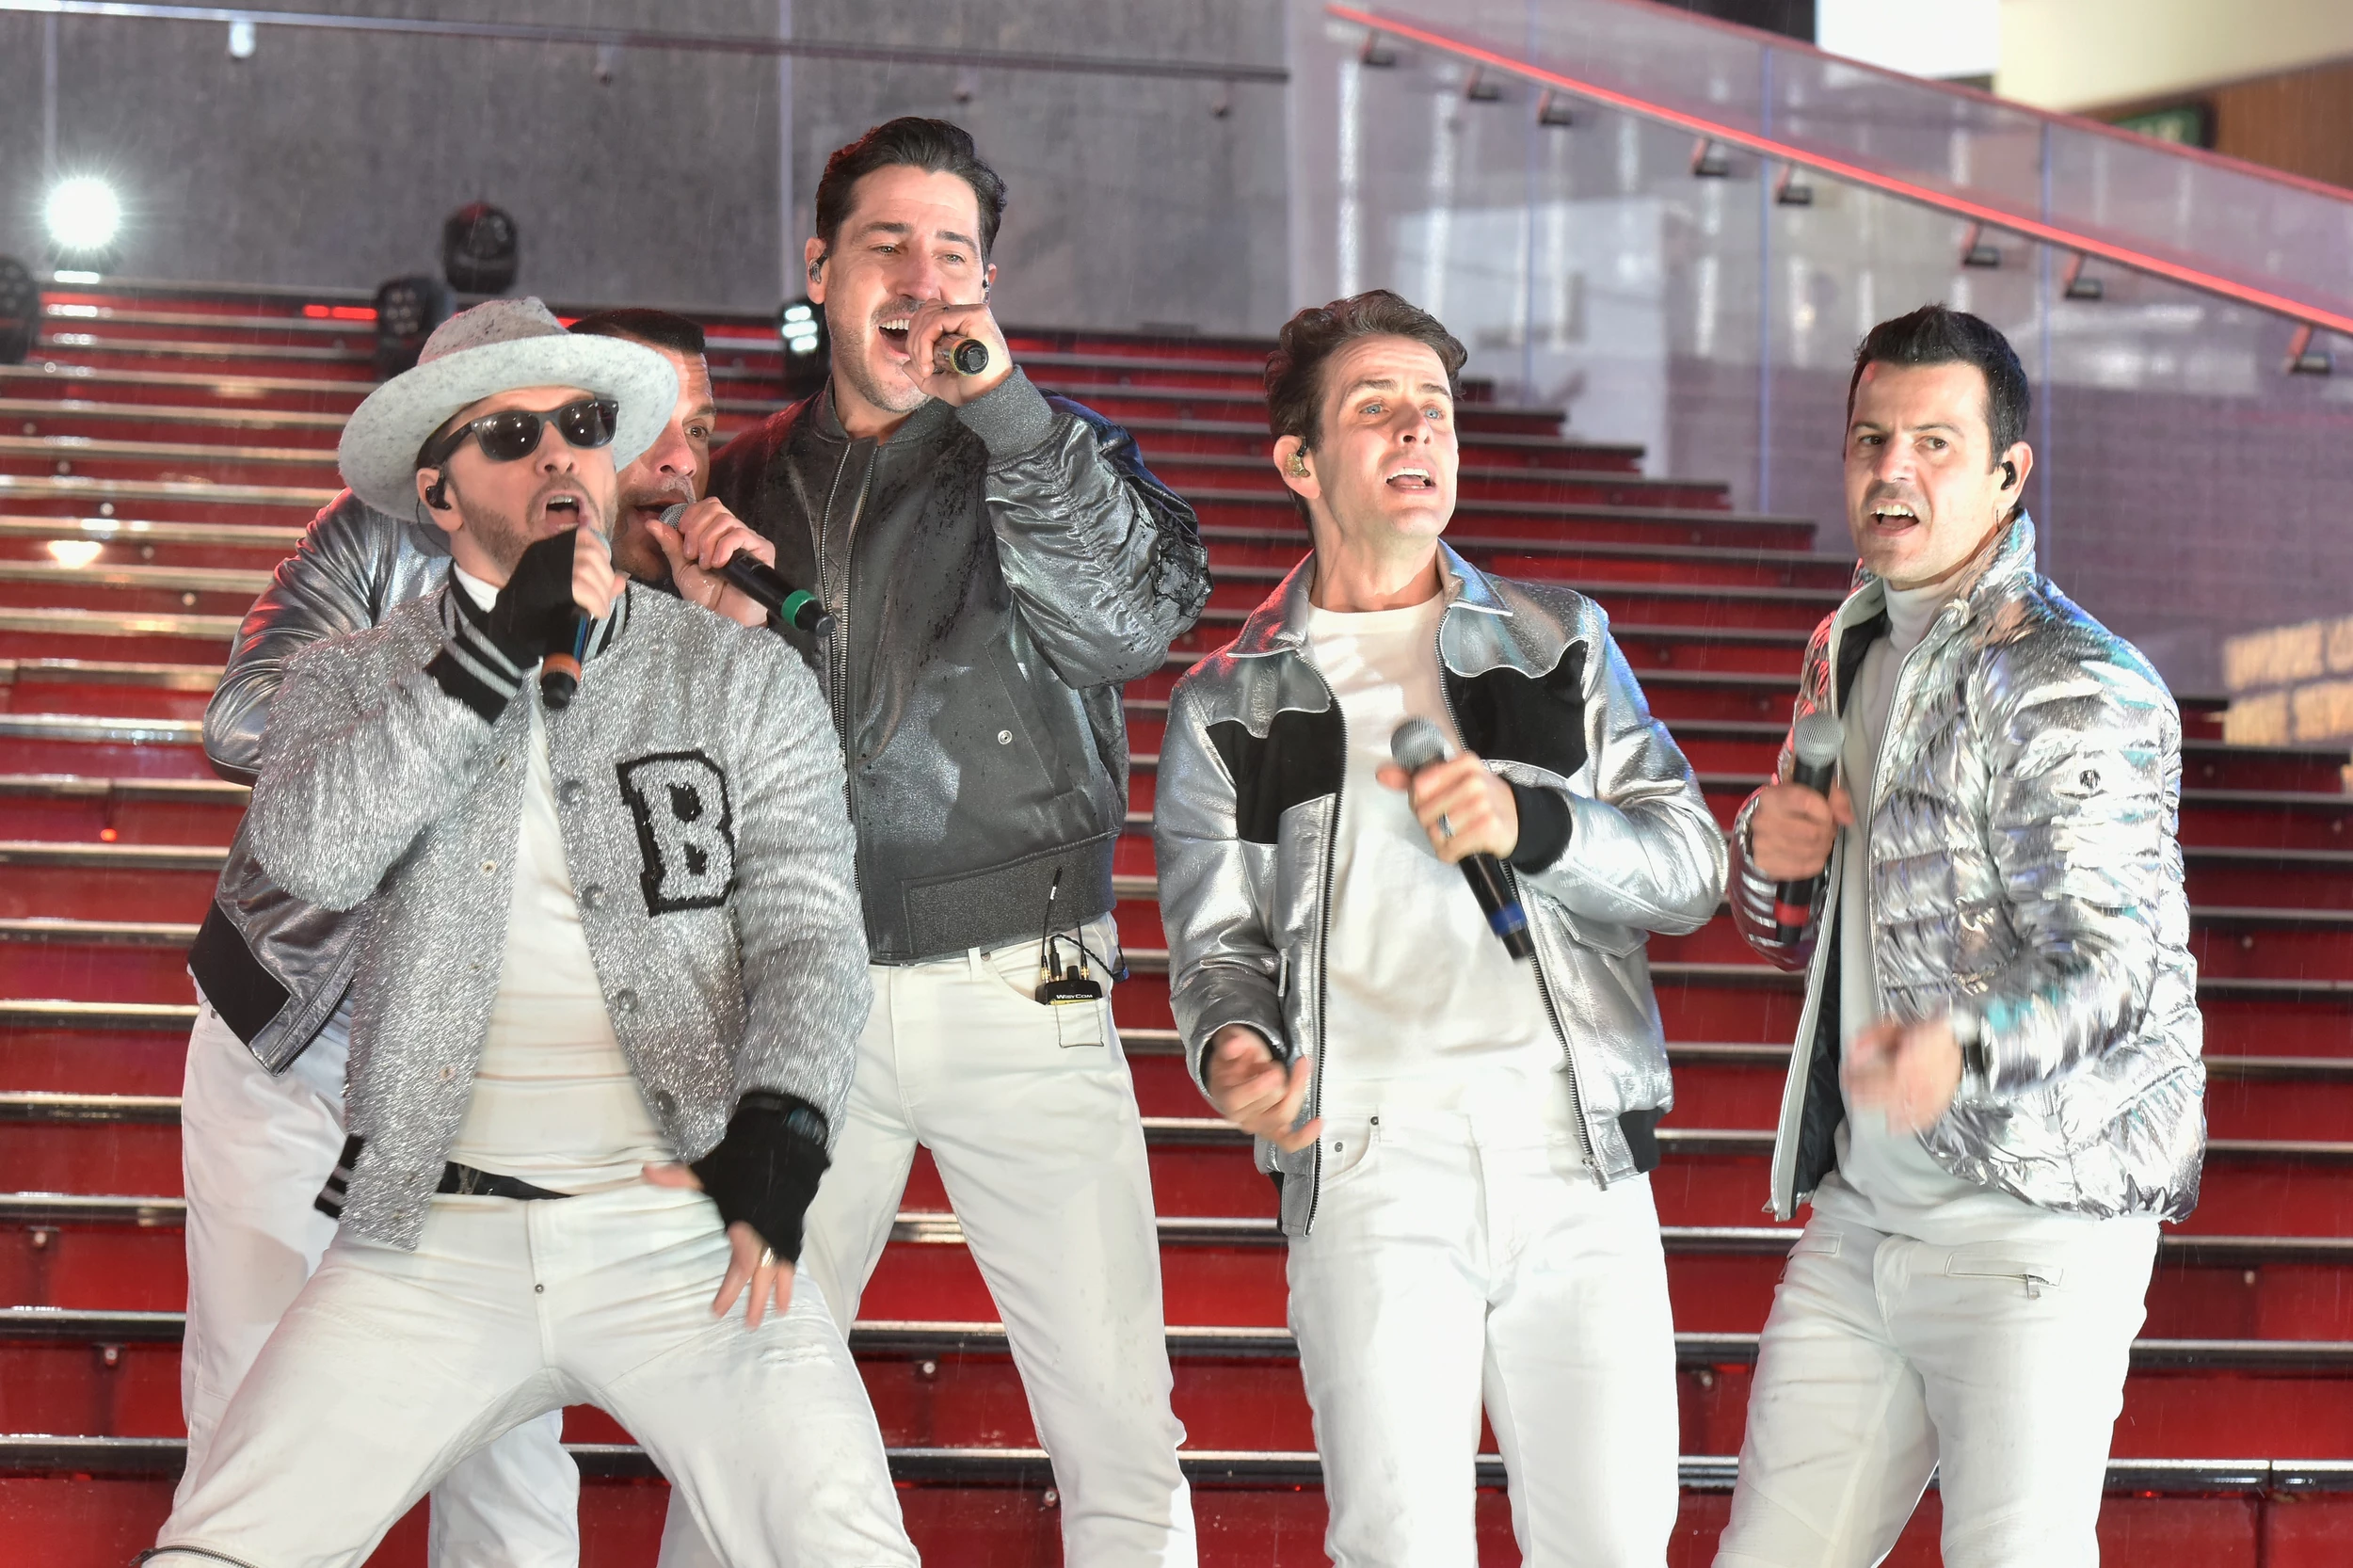 the boys in the band nkotb download mp3 download